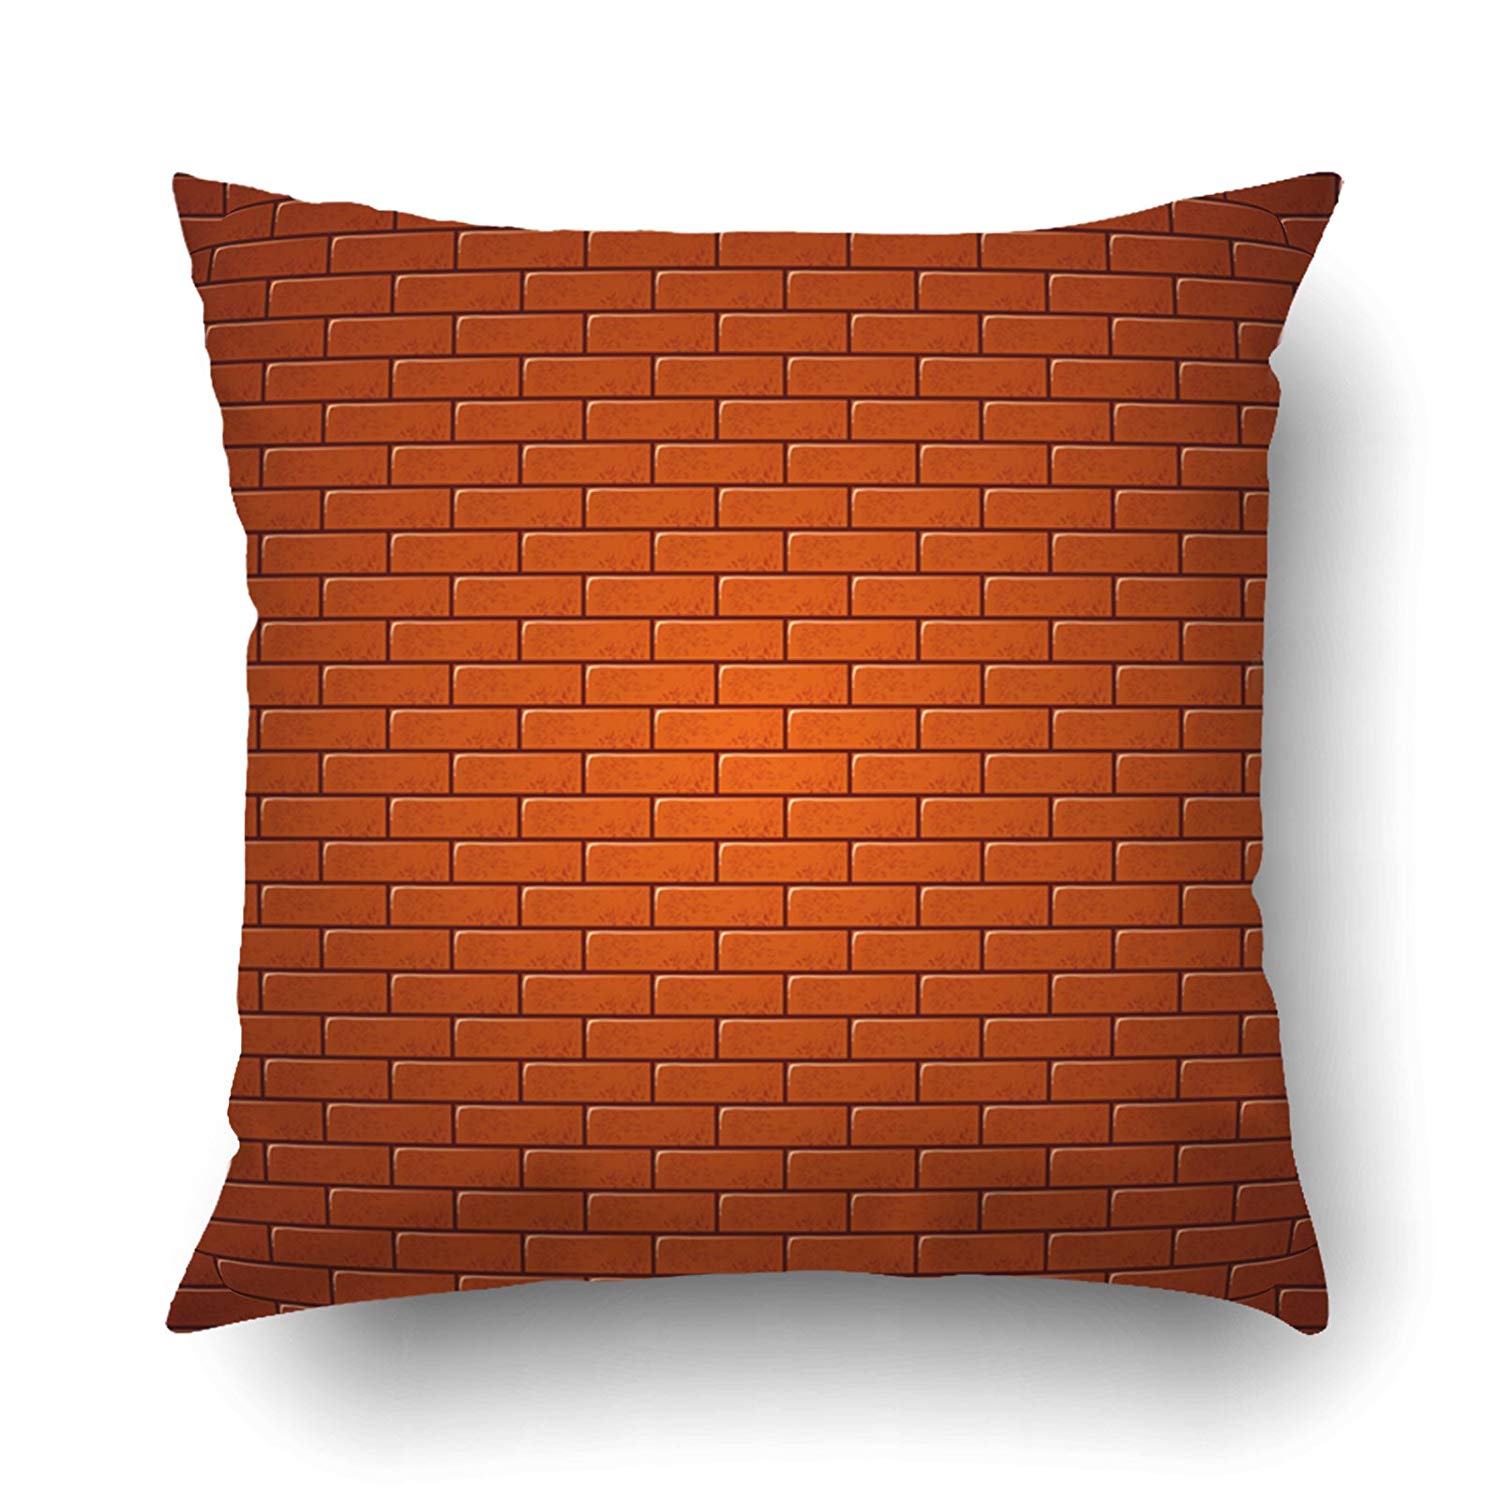 BPBOP Red Brick Wall Pattern Pillowcase Pillow Cushion Cover 20x20 inch - image 1 of 1